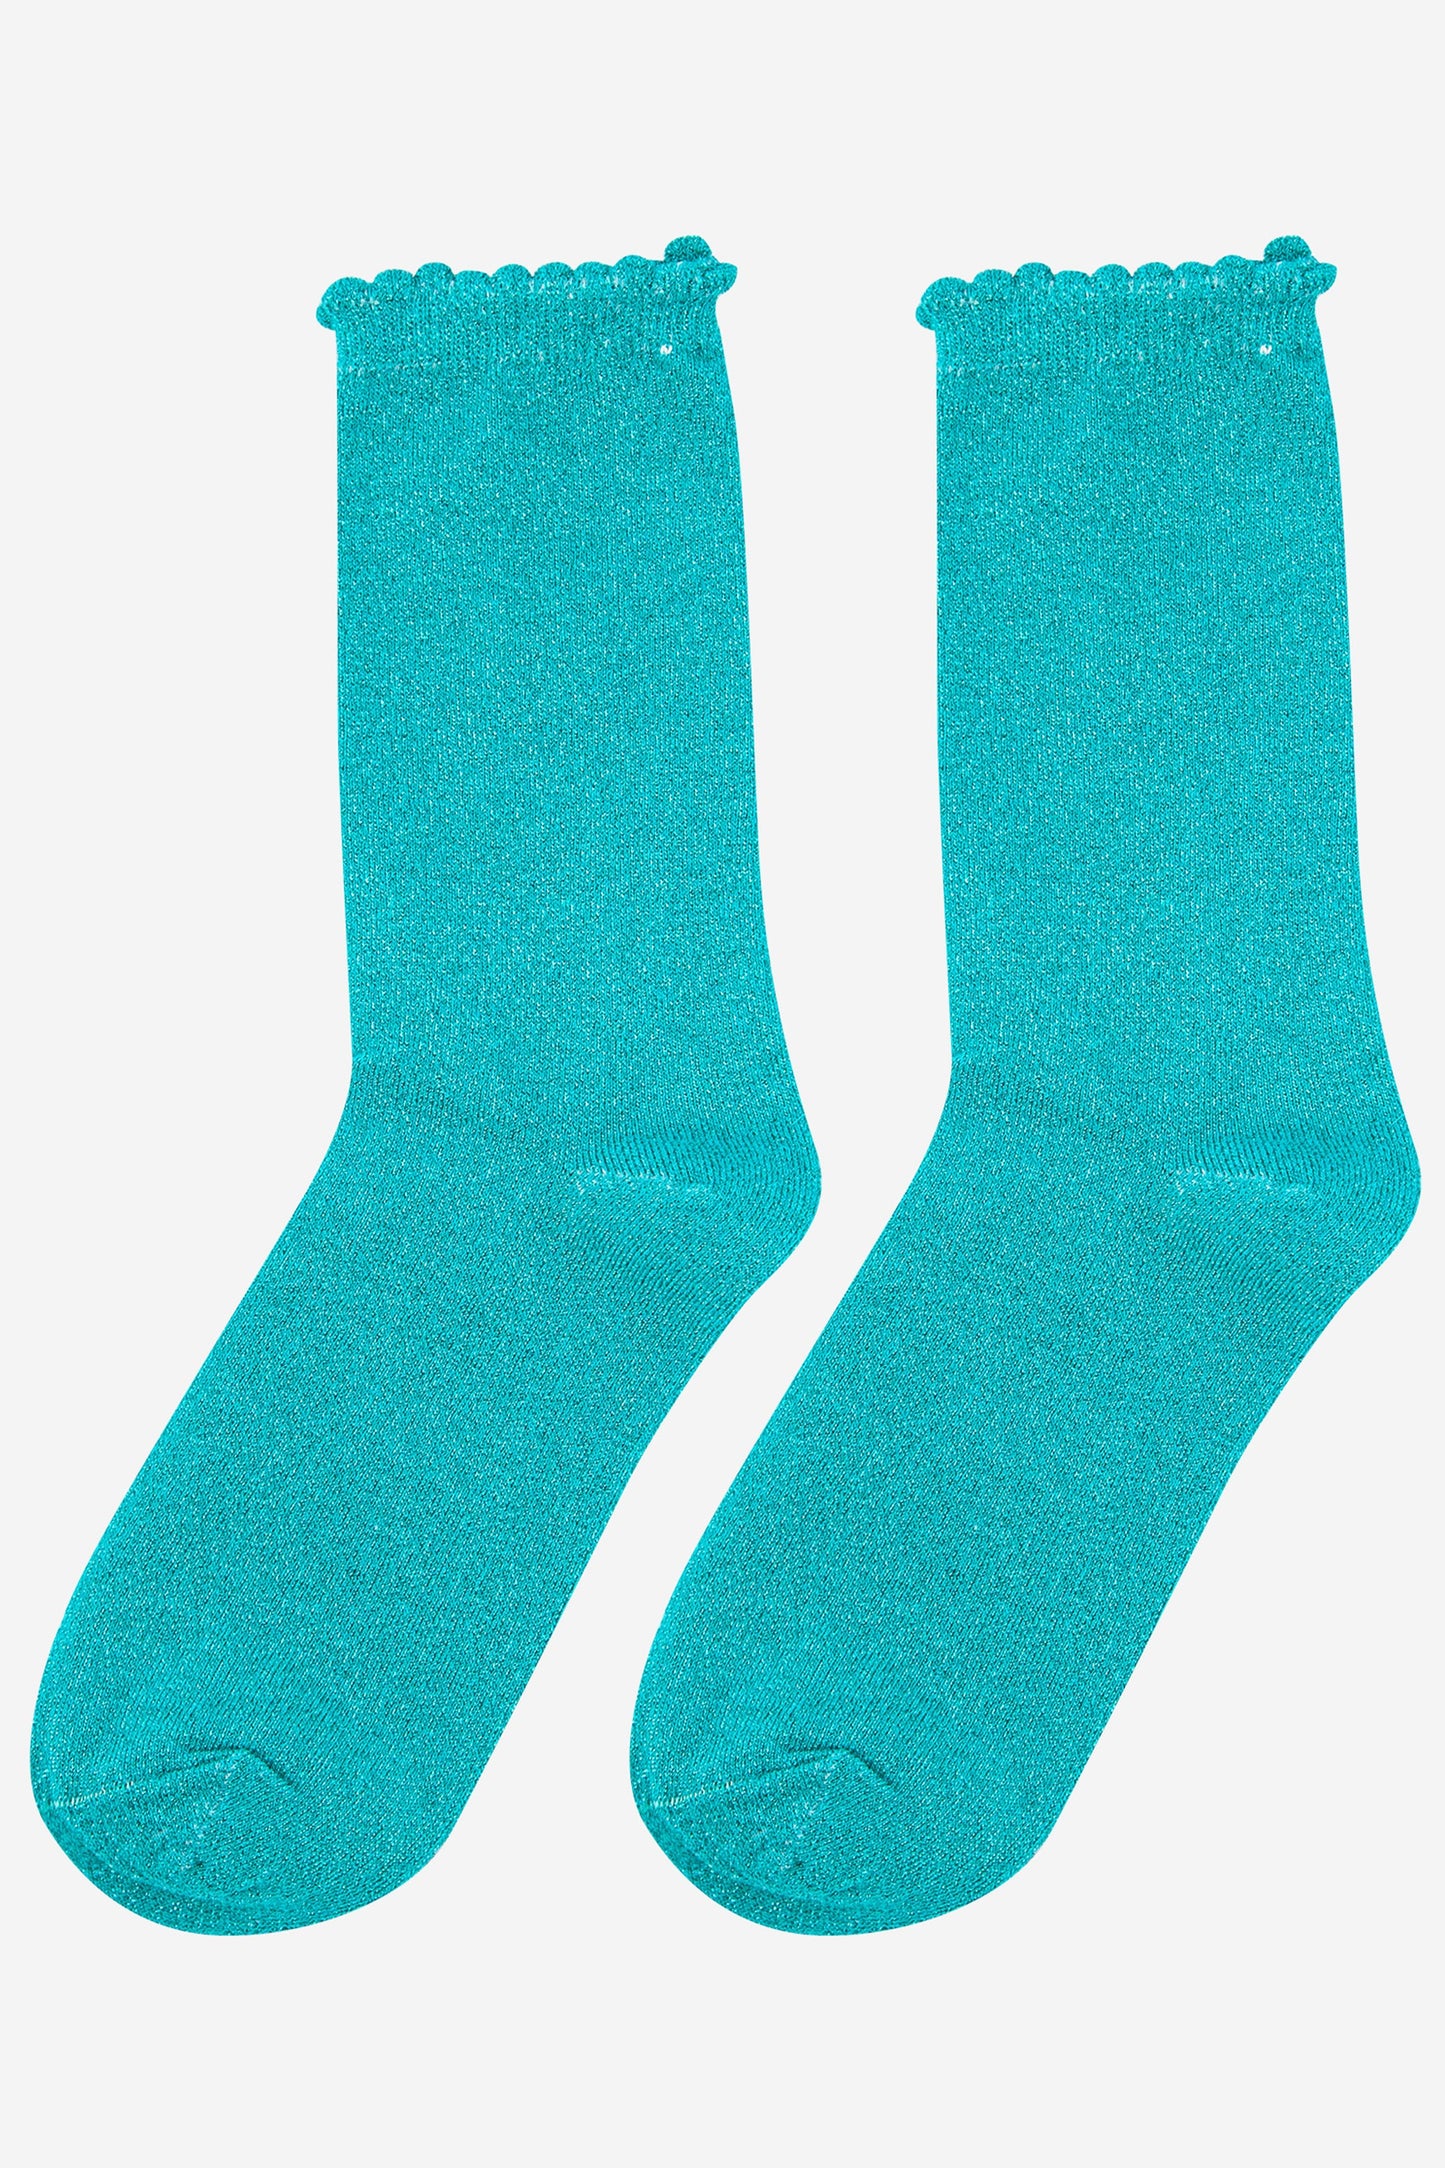 aqua blue sparkly glitter socks with scalloped cuffs and an all over shimmer